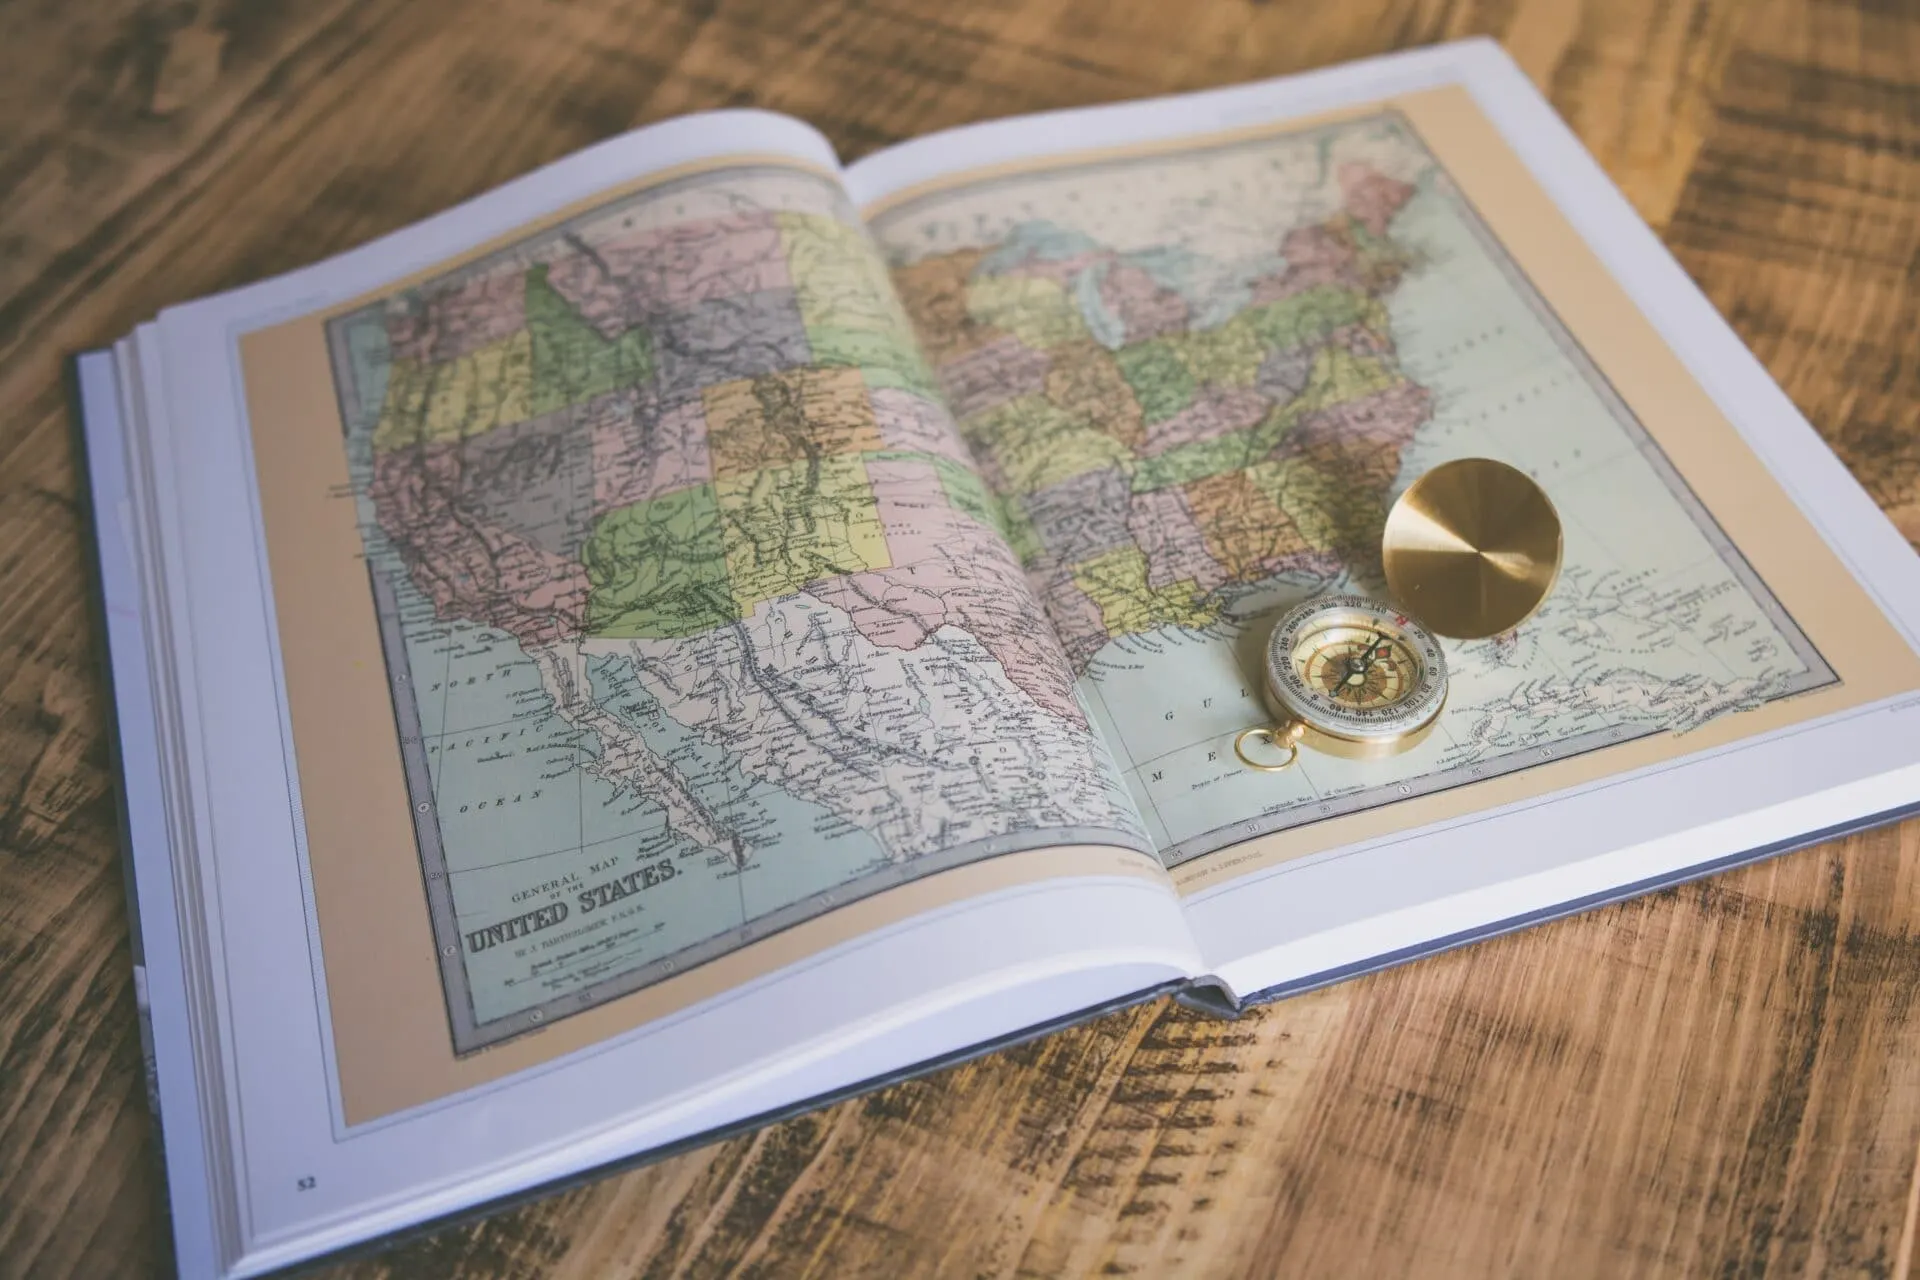 Book of maps for offline trip planning